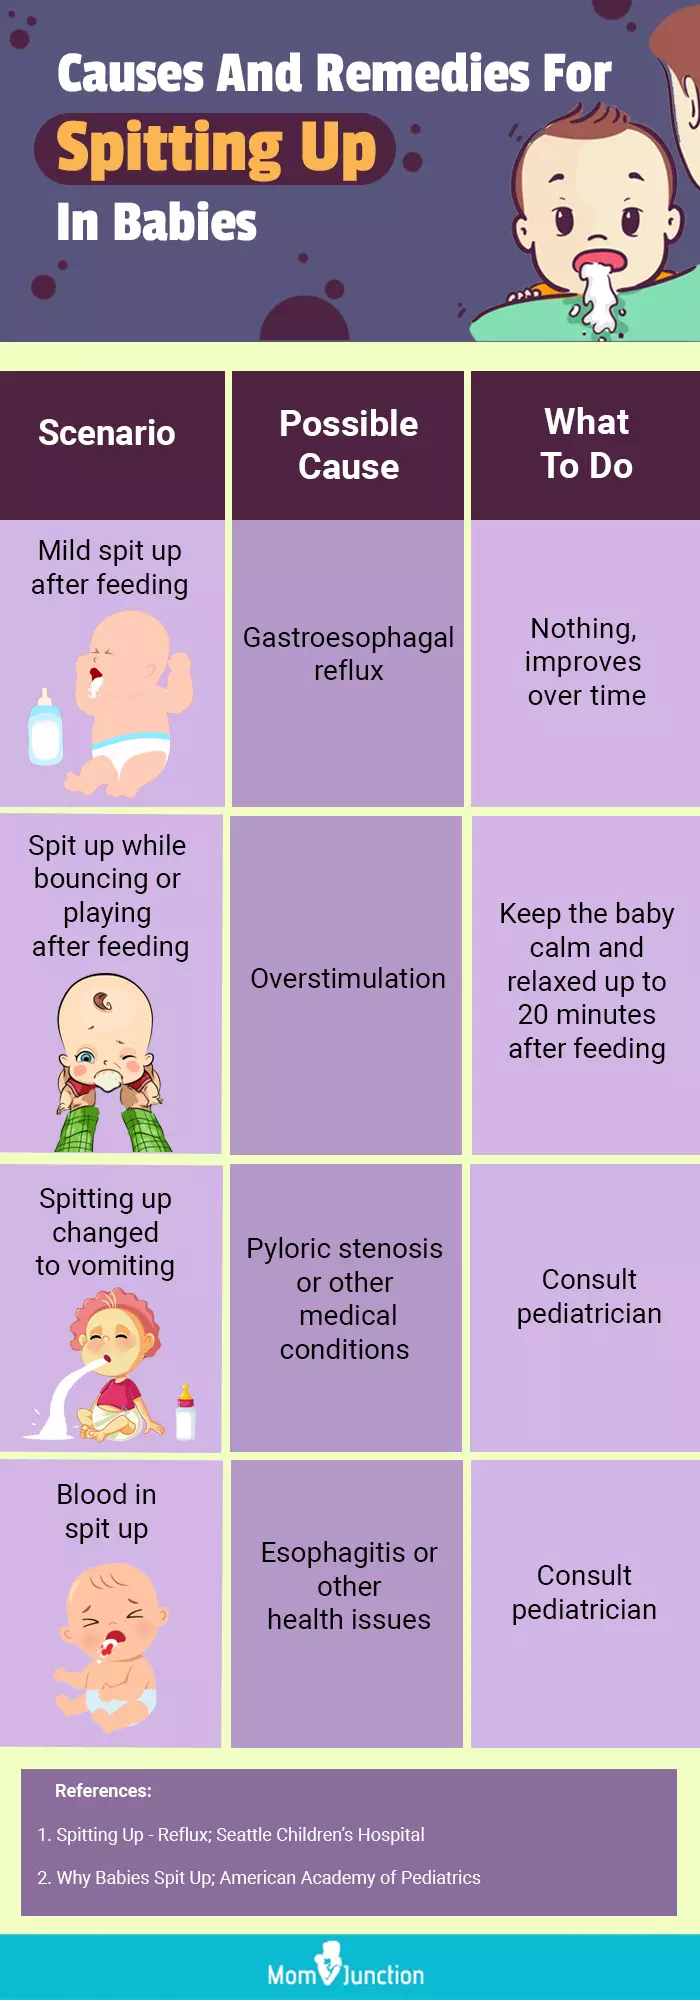 causes and remedies for spitting up in babies (infographic)